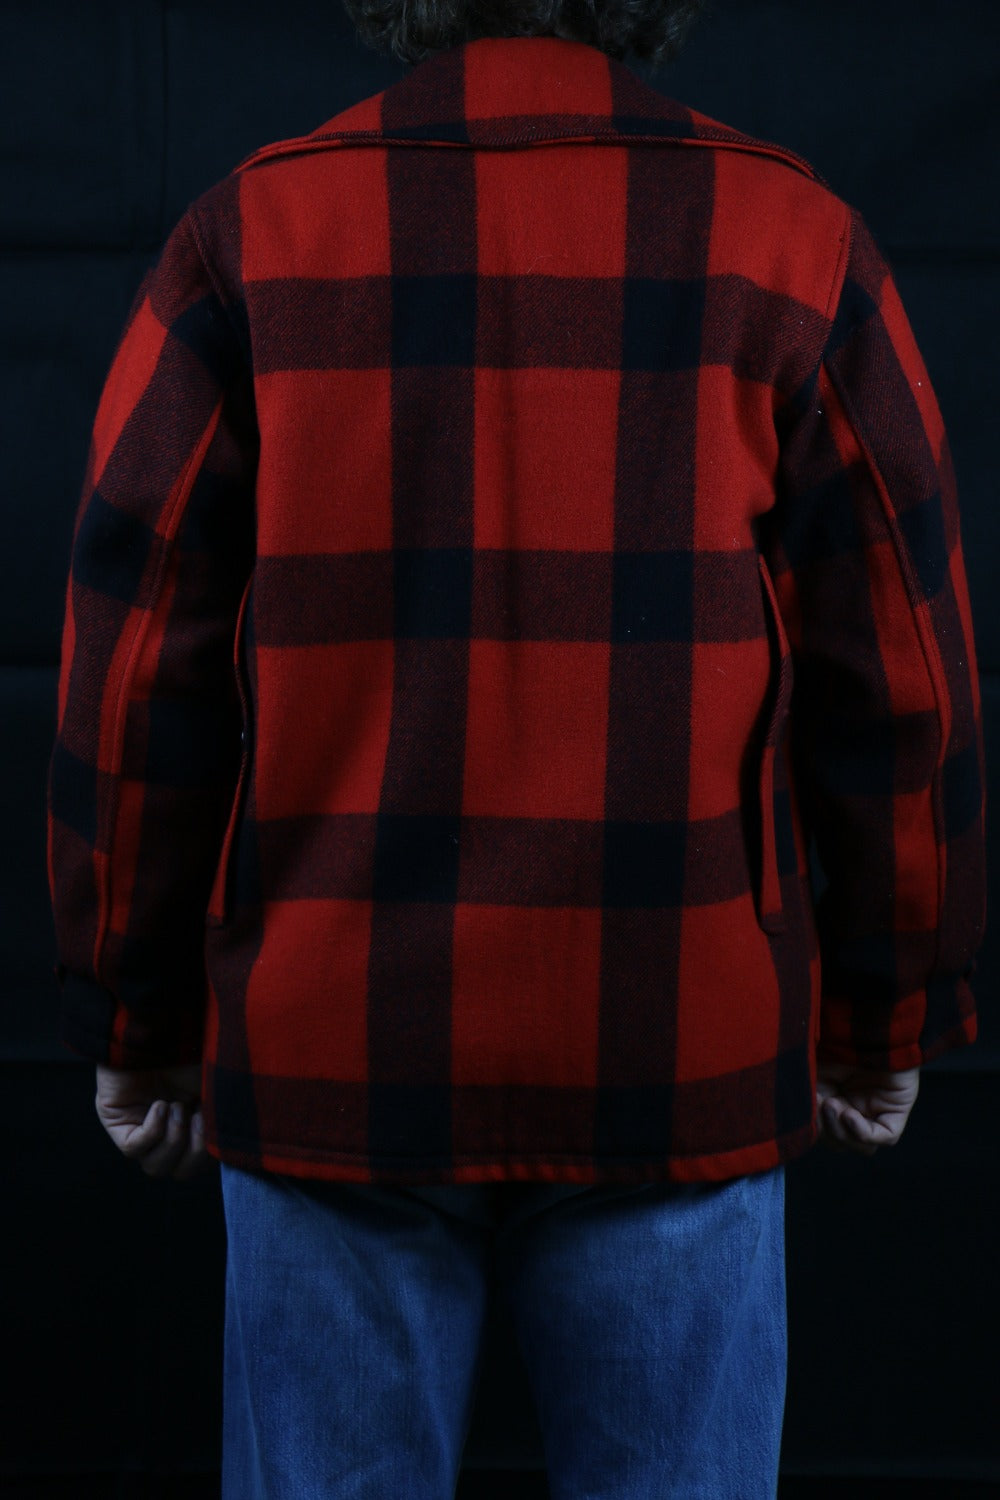 Woolrich Red and Black Plaid Jacket 60s, clochard92.com